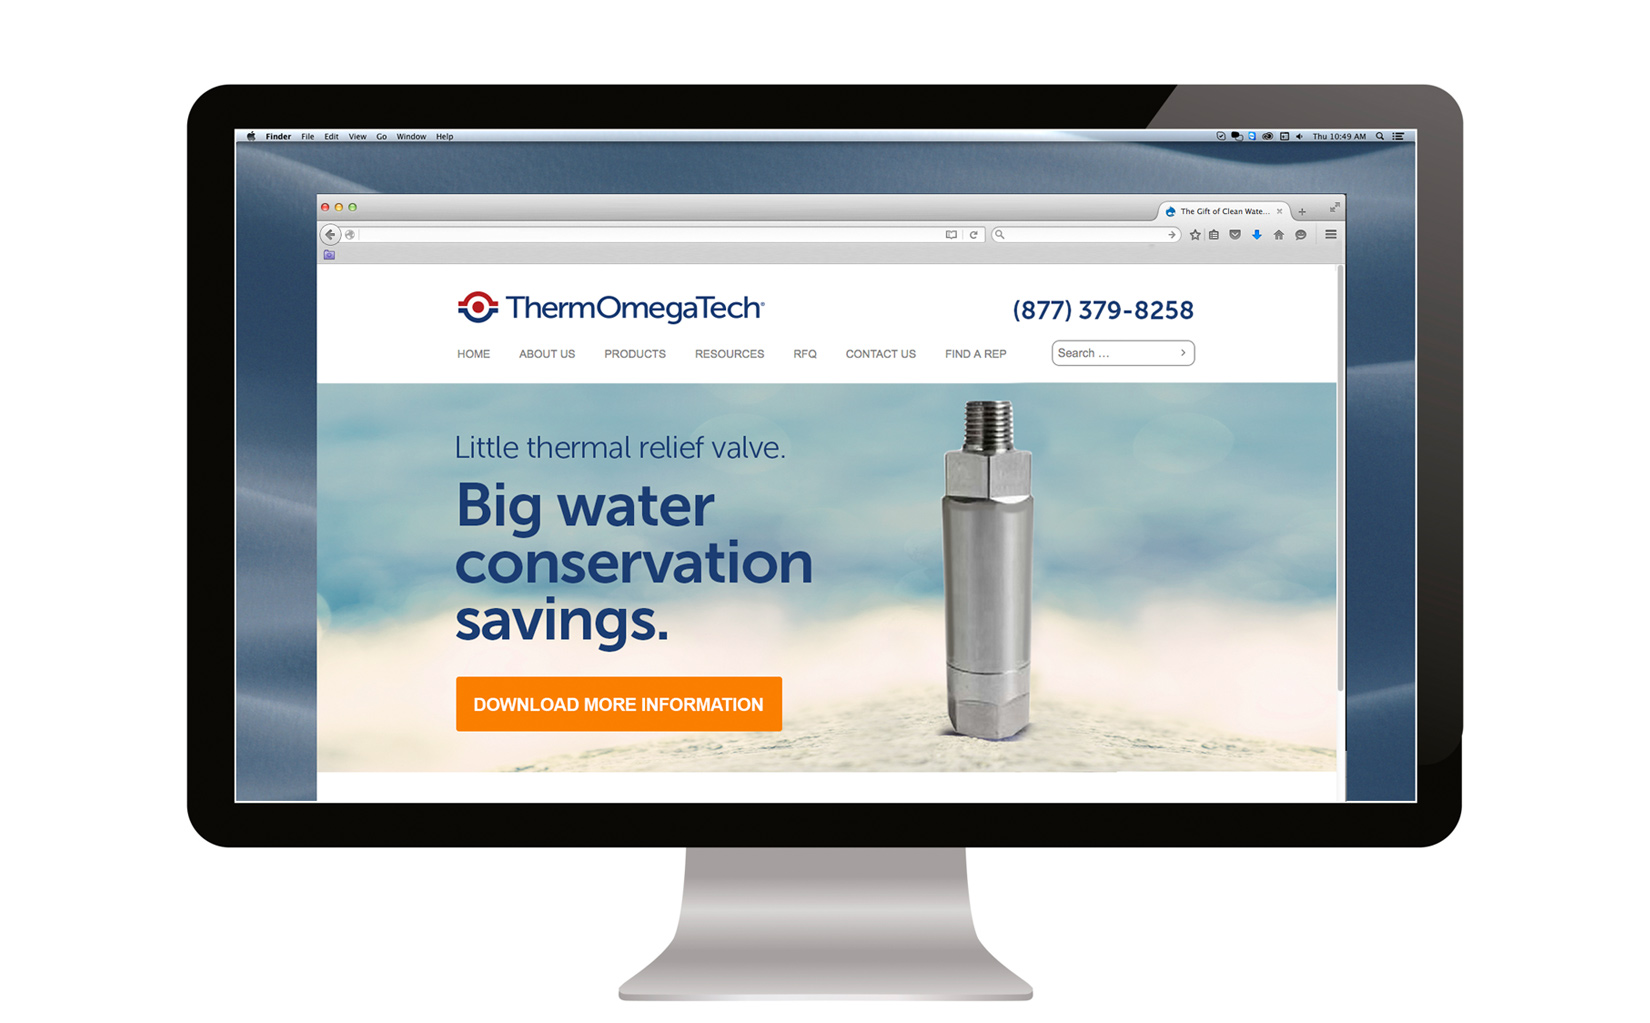 ThermOmegaTech homepage on computer monitor